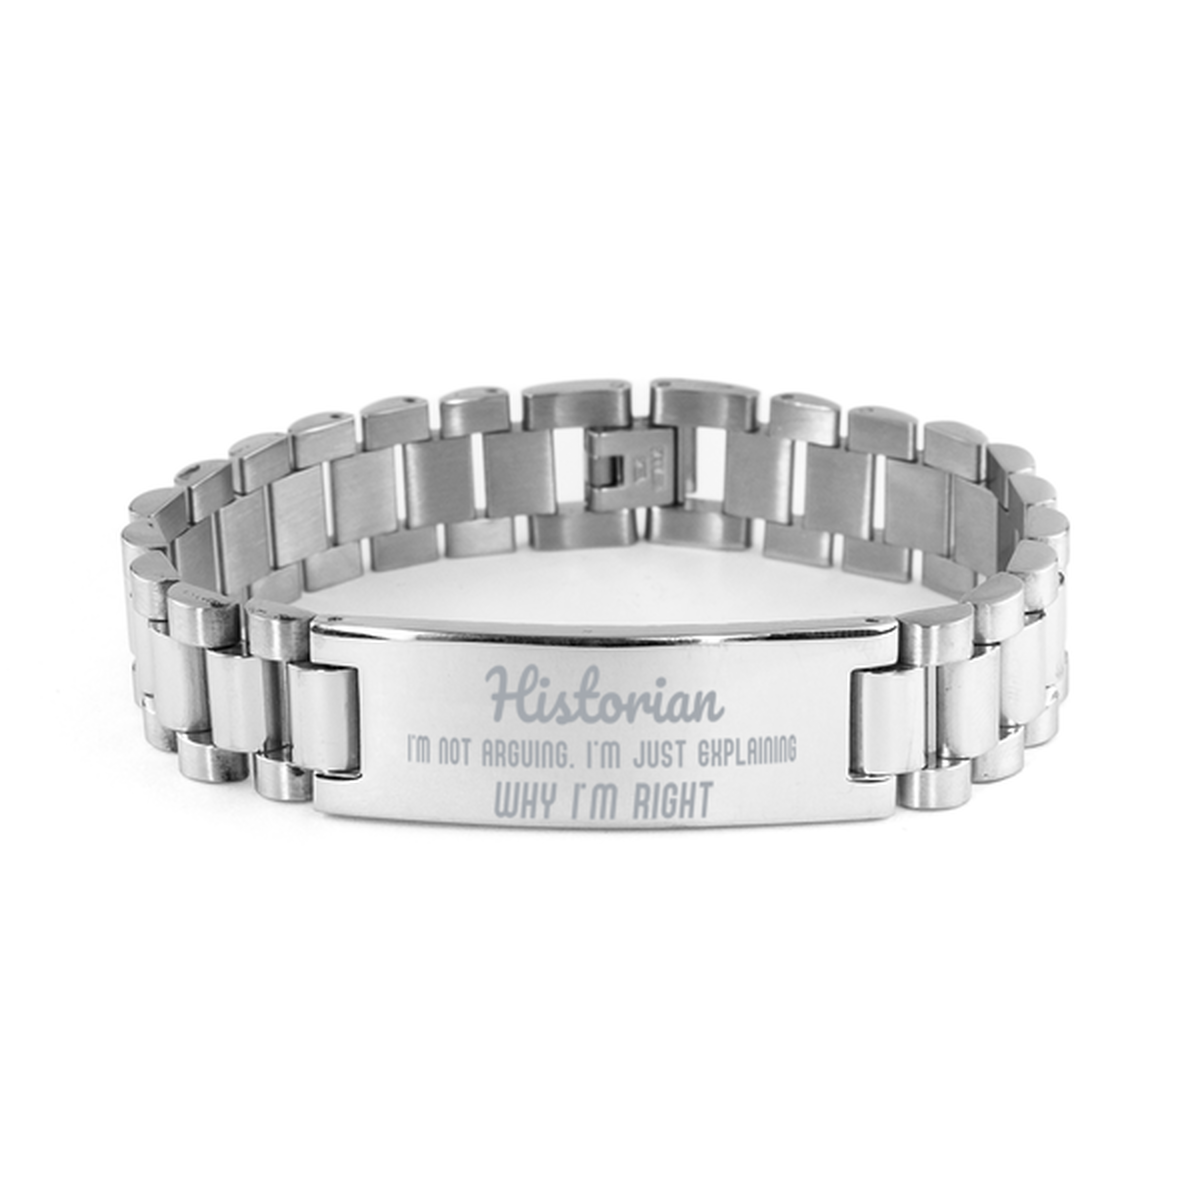 Historian I'm not Arguing. I'm Just Explaining Why I'm RIGHT Ladder Stainless Steel Bracelet, Graduation Birthday Christmas Historian Gifts For Historian Funny Saying Quote Present for Men Women Coworker